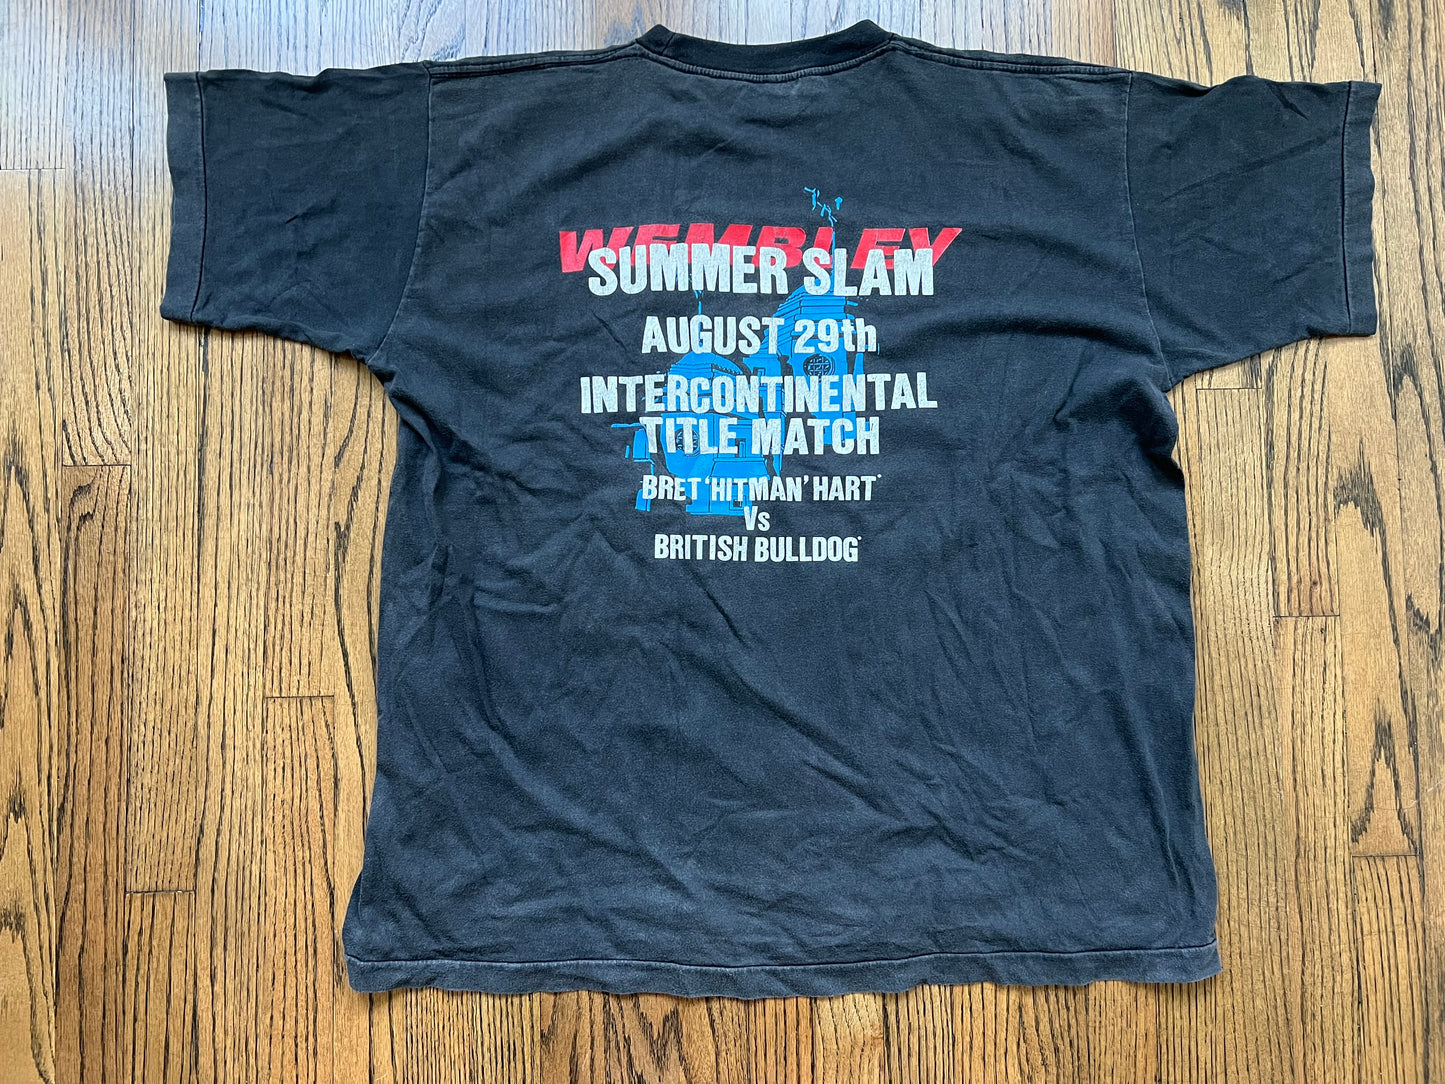 1992 WWF Summerslam two sided shirt featuring Bret “The Hitman” Hart and “The British Bulldog” Davey Boy Smith